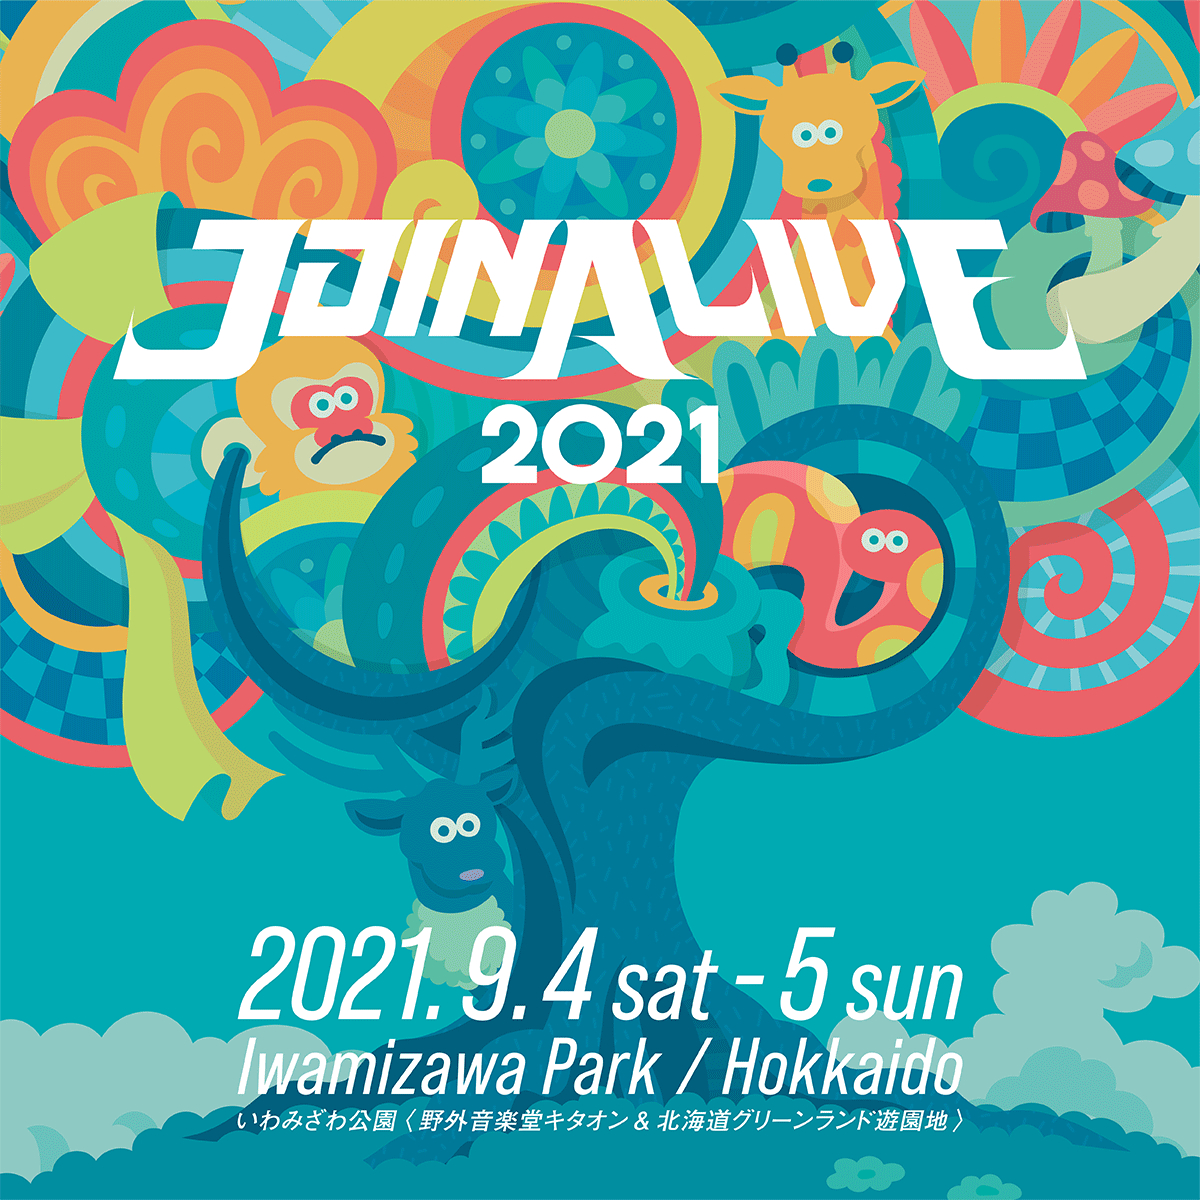 『JOIN ALIVE 2021』フライヤー